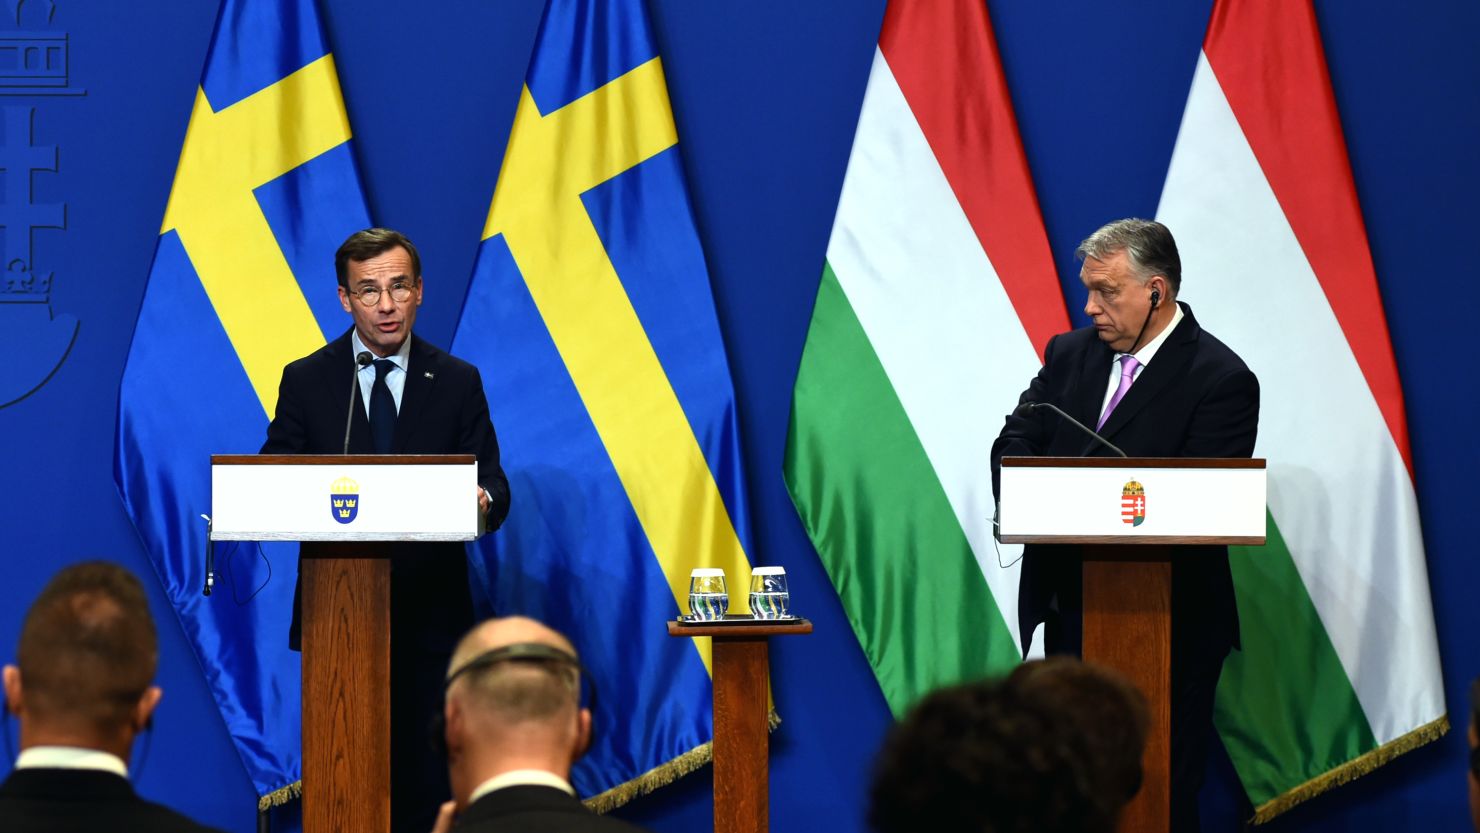 Swedish Prime Minister Ulf Kristersson meets with Hungarian Prime Minister Viktor Orban in Budapest.